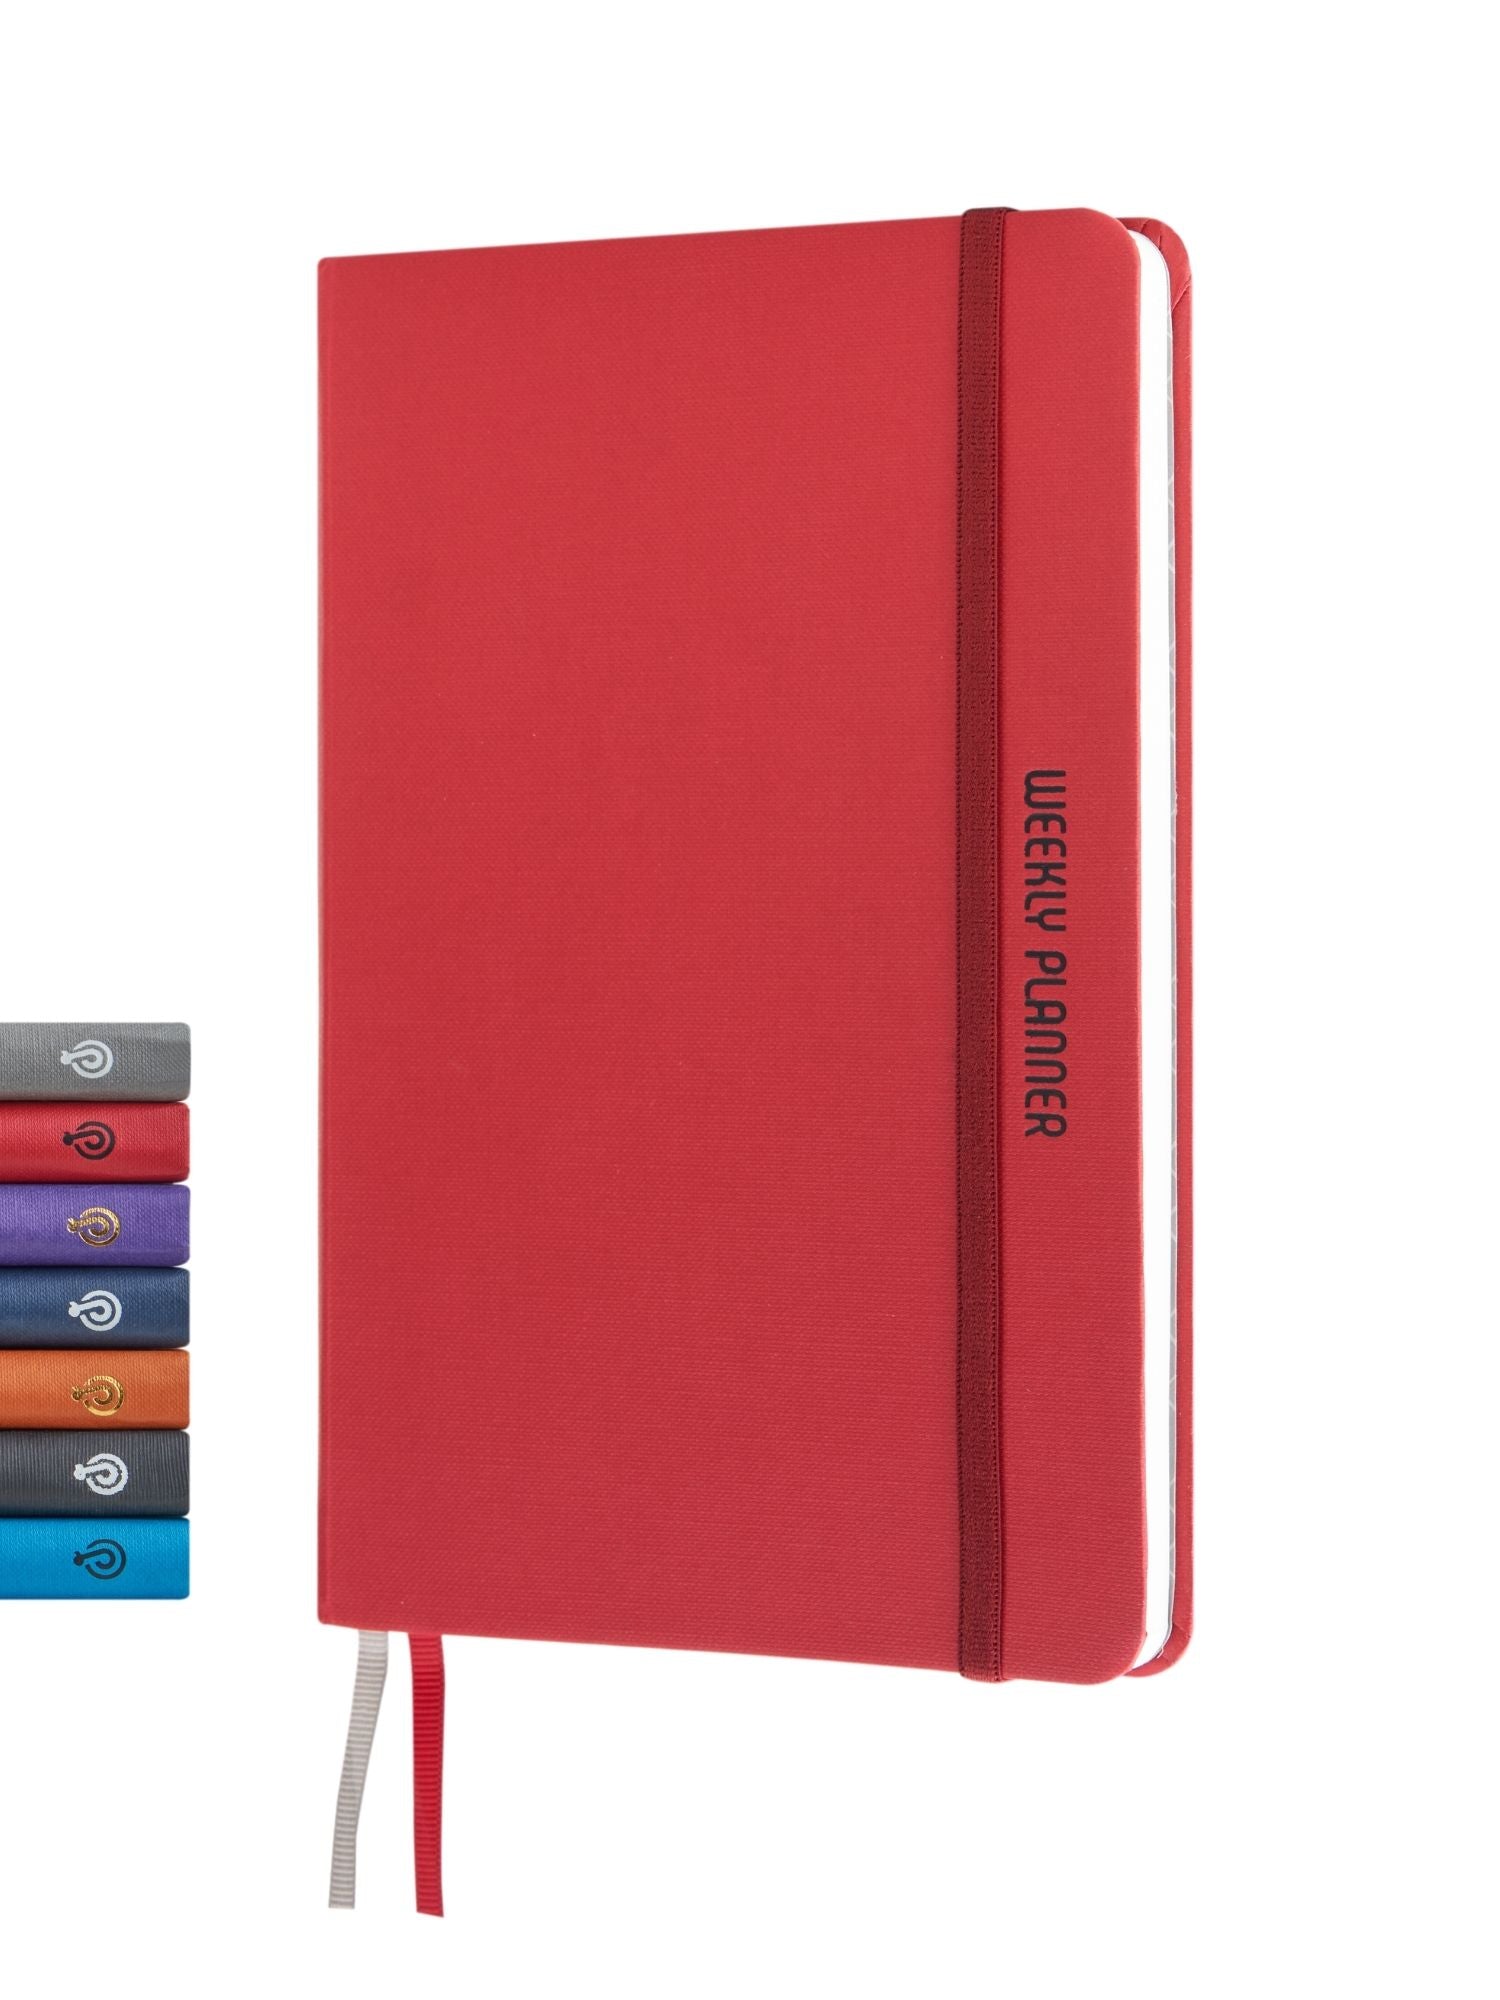 DOODLE Organise- It Hardbound A5 Weekly Planner - Red